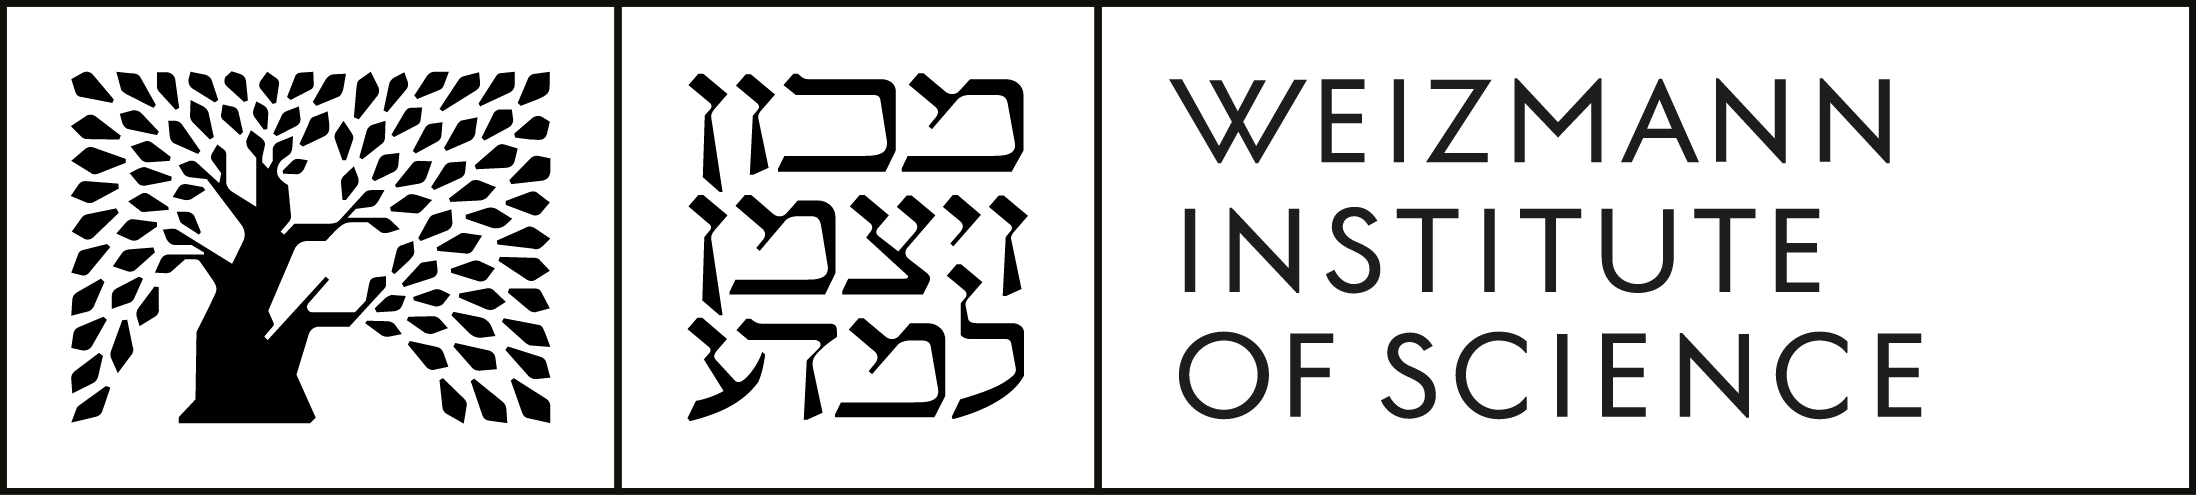 http://www.weizmann.ac.il/pages/sites/default/files/wis_logo_wis_logo_eng_v1_black.png